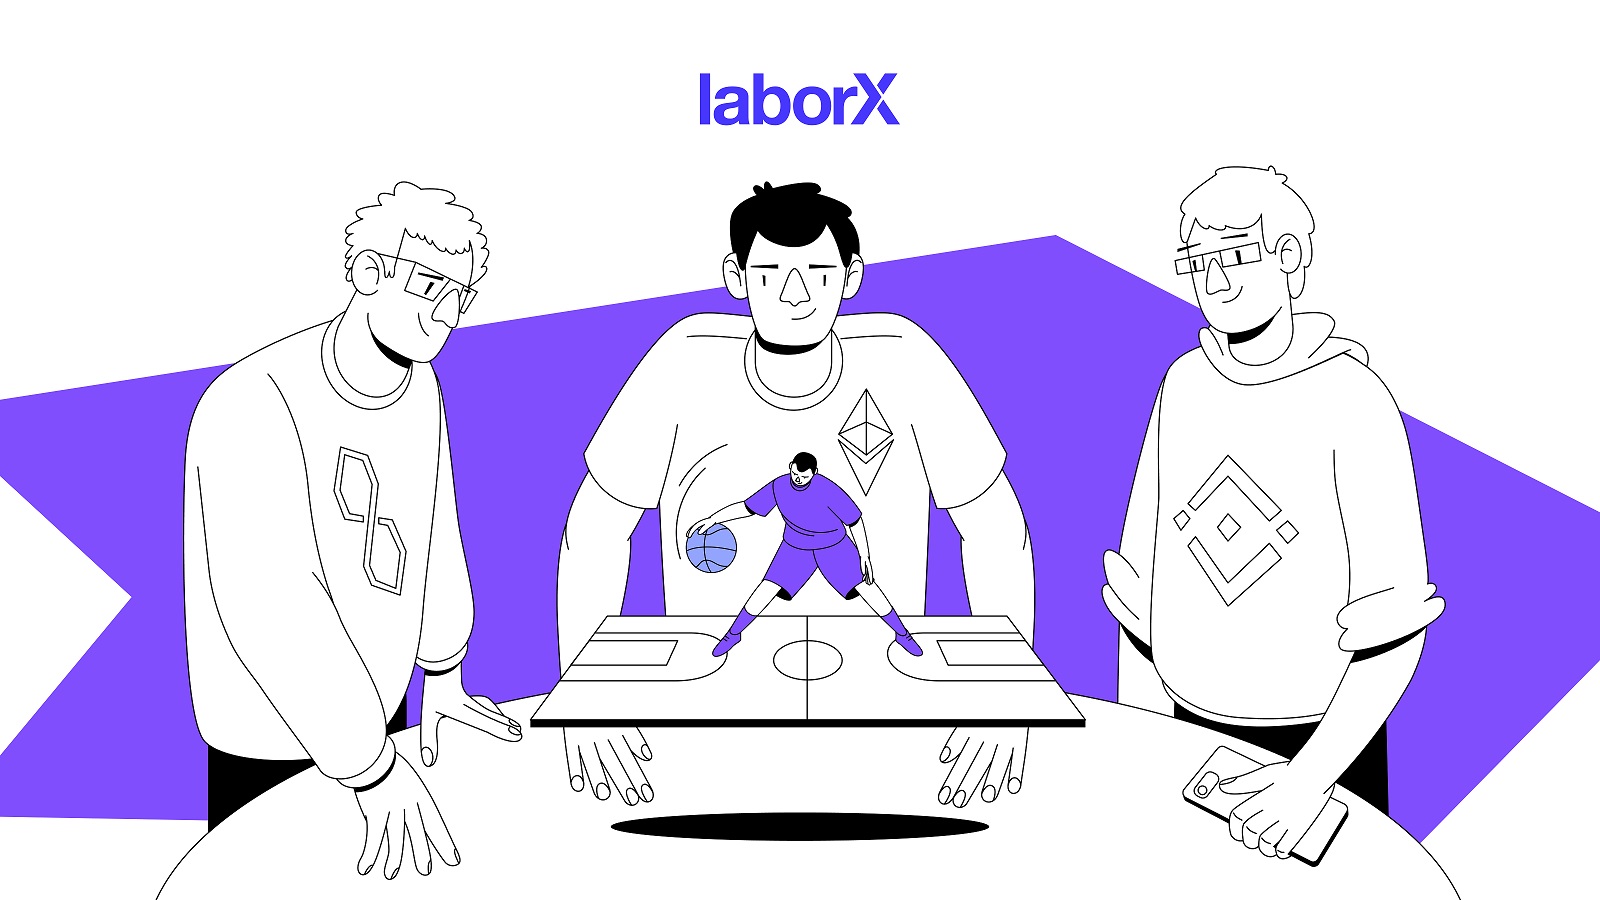 COVID And P2E Drive Growth Of Decentralised Work Platform LaborX